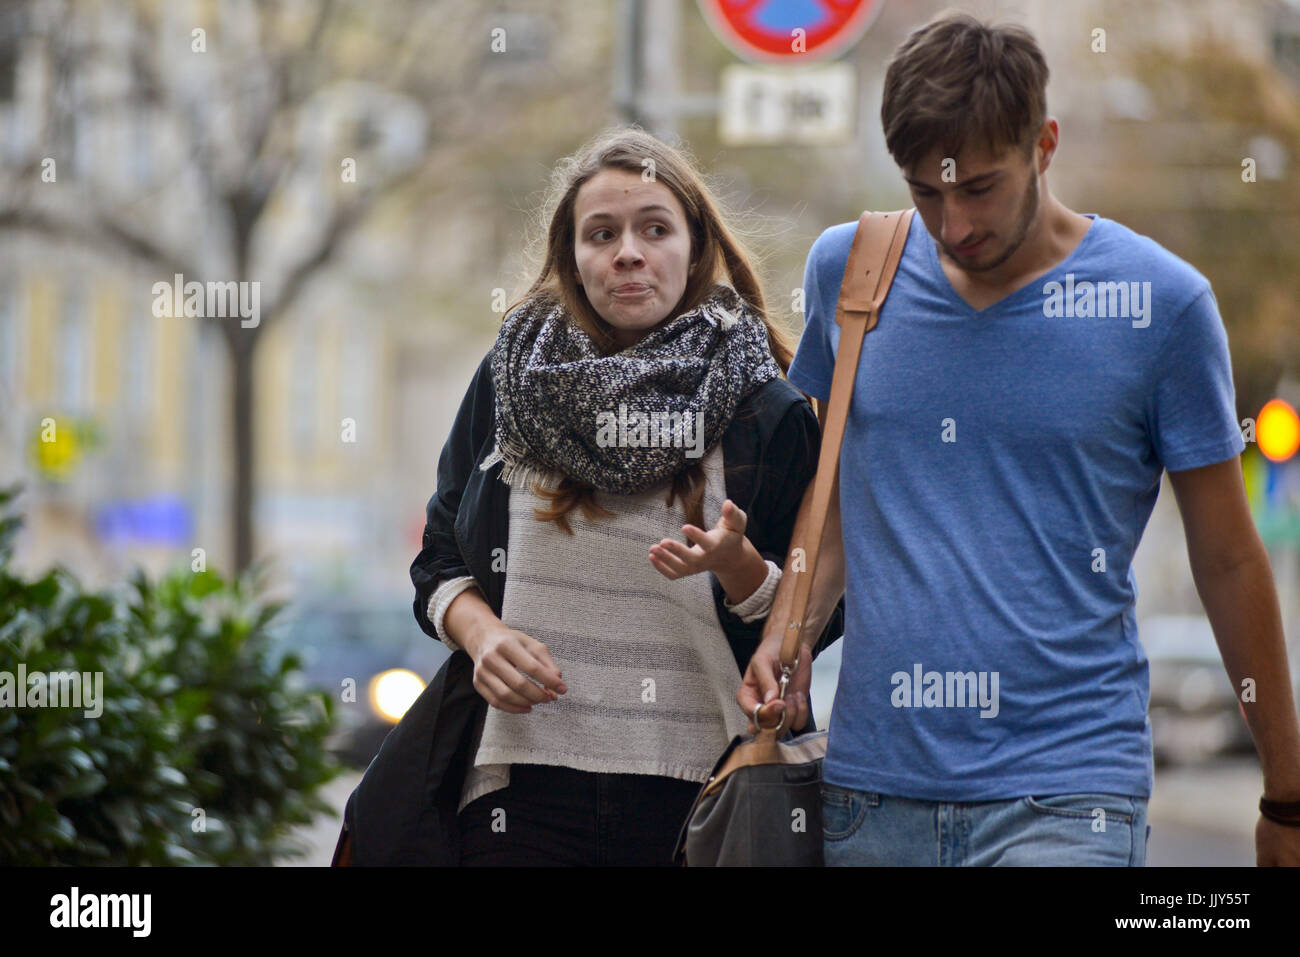 A couple arguing in the street Stock Photo